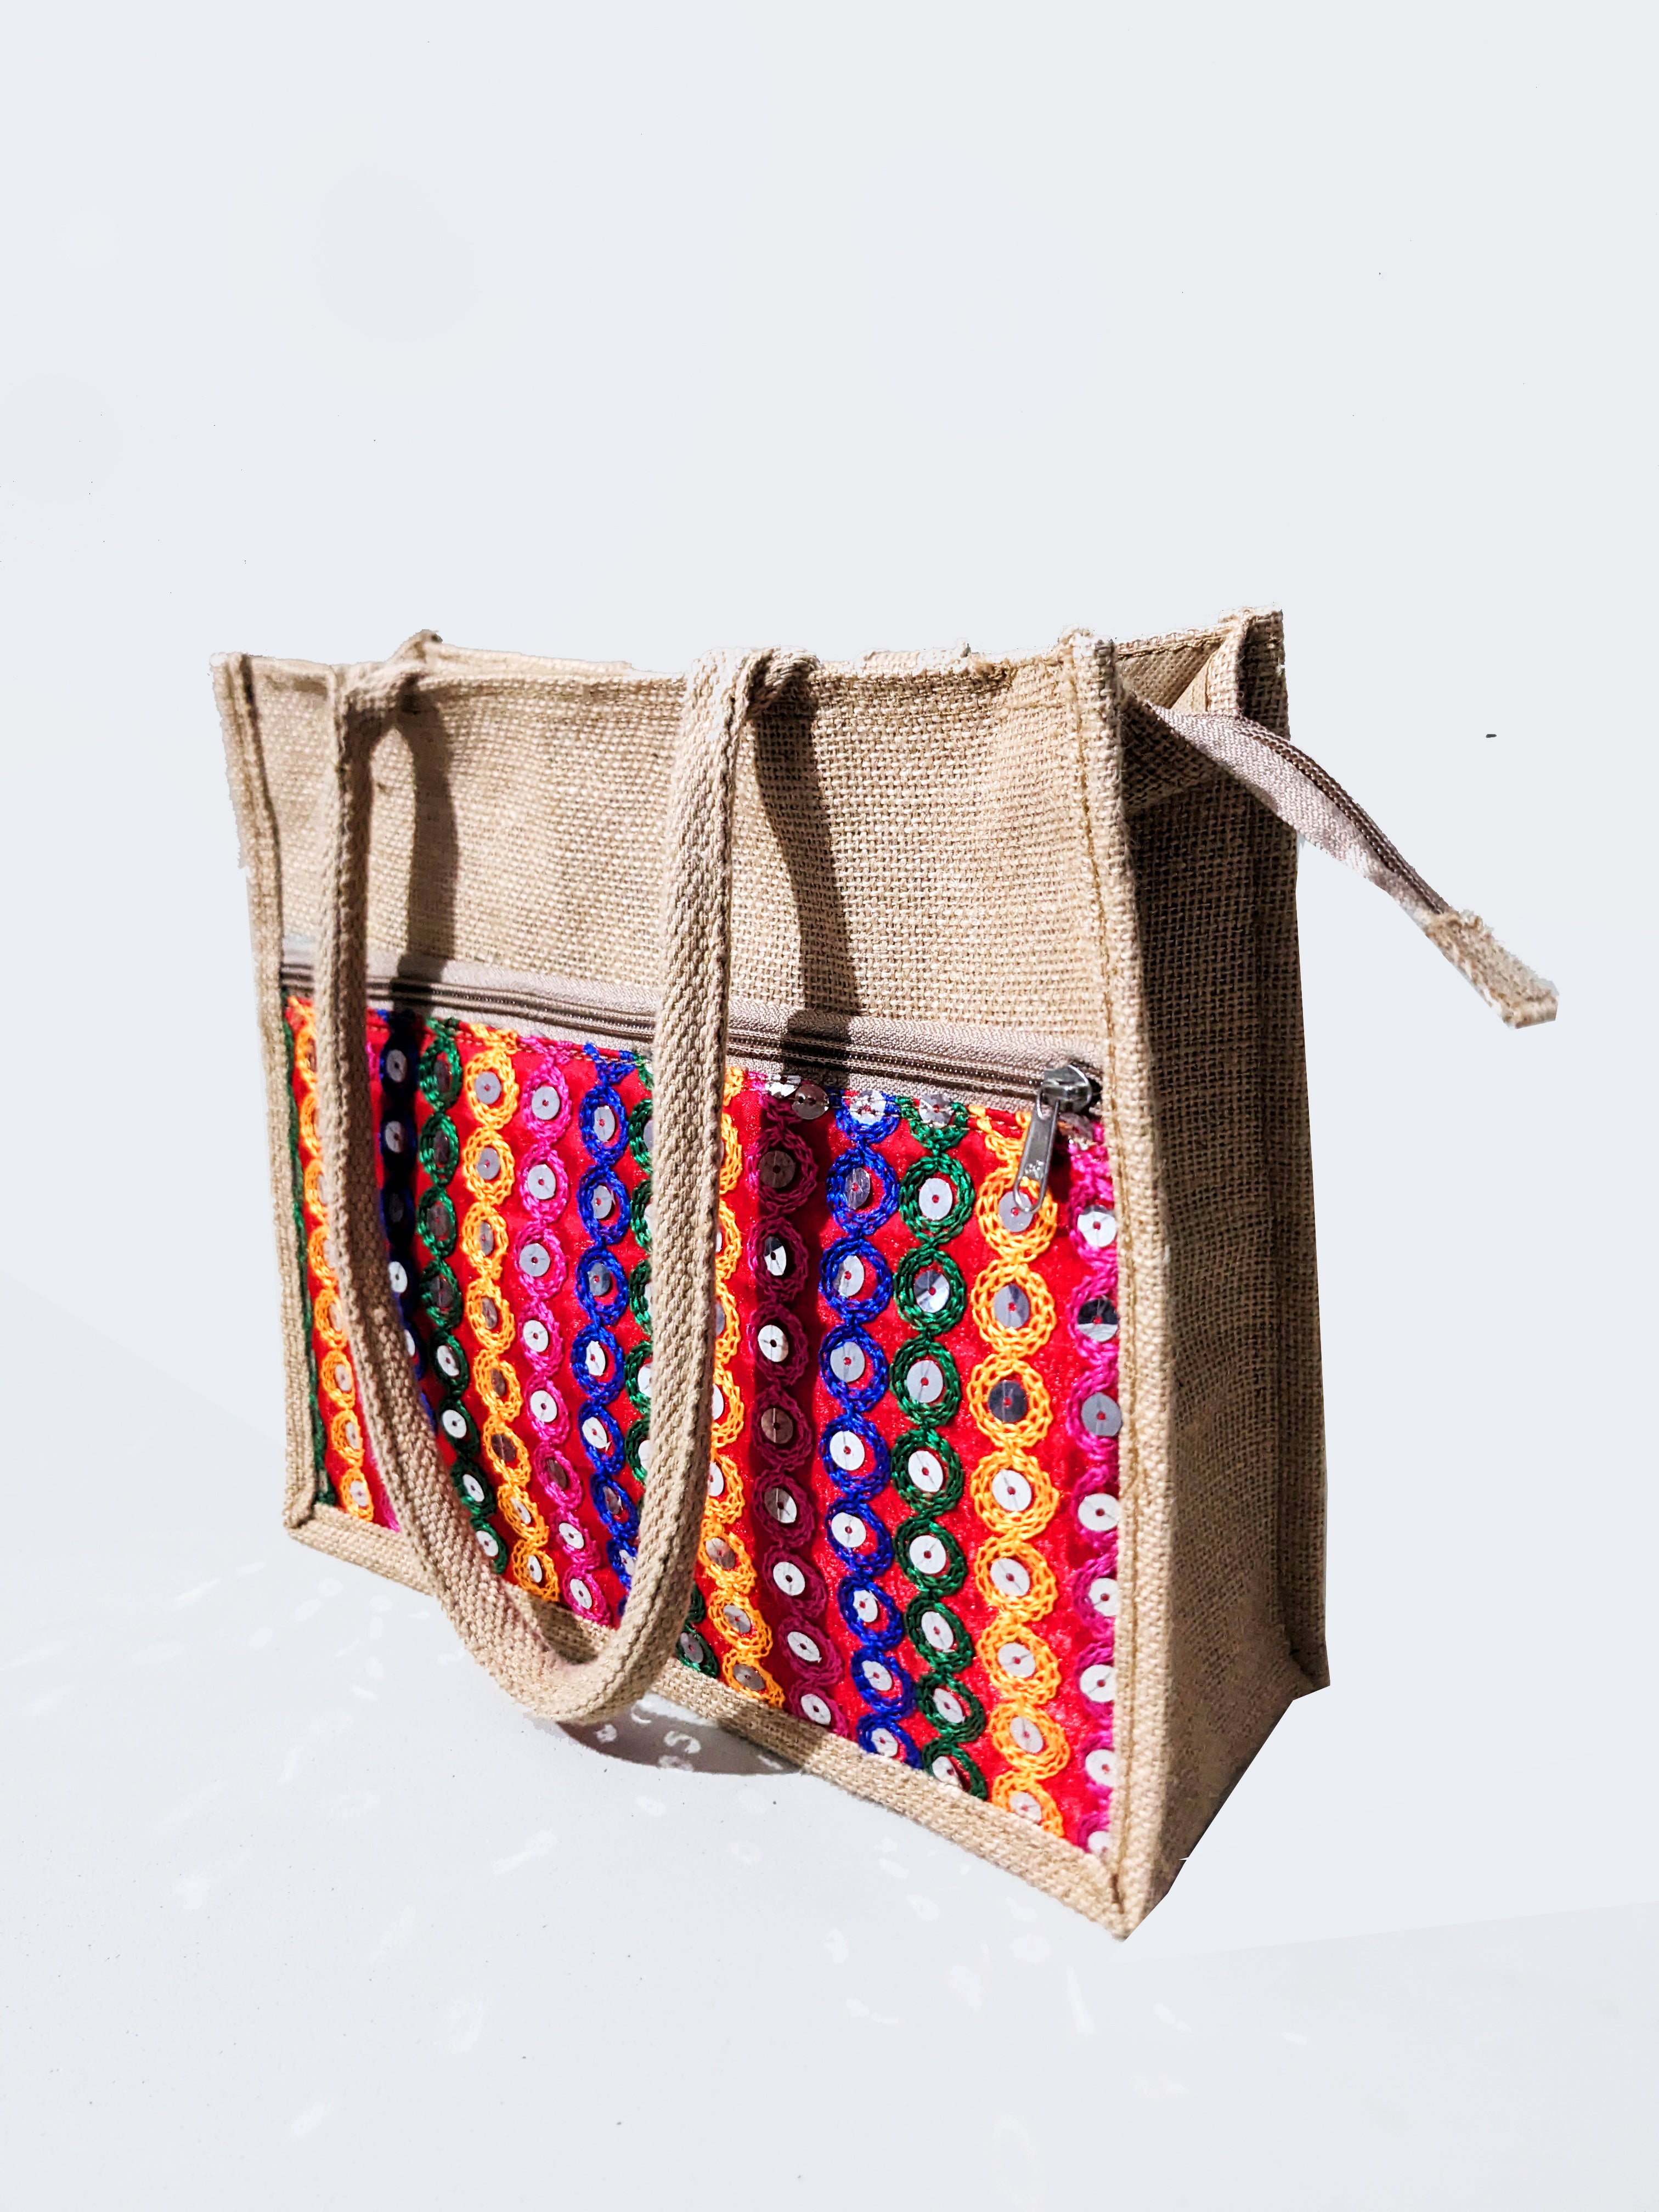 Ladies Jute Hand Bags - Ladies Jute Hand Bags buyers, suppliers, importers,  exporters and manufacturers - Latest price and trends